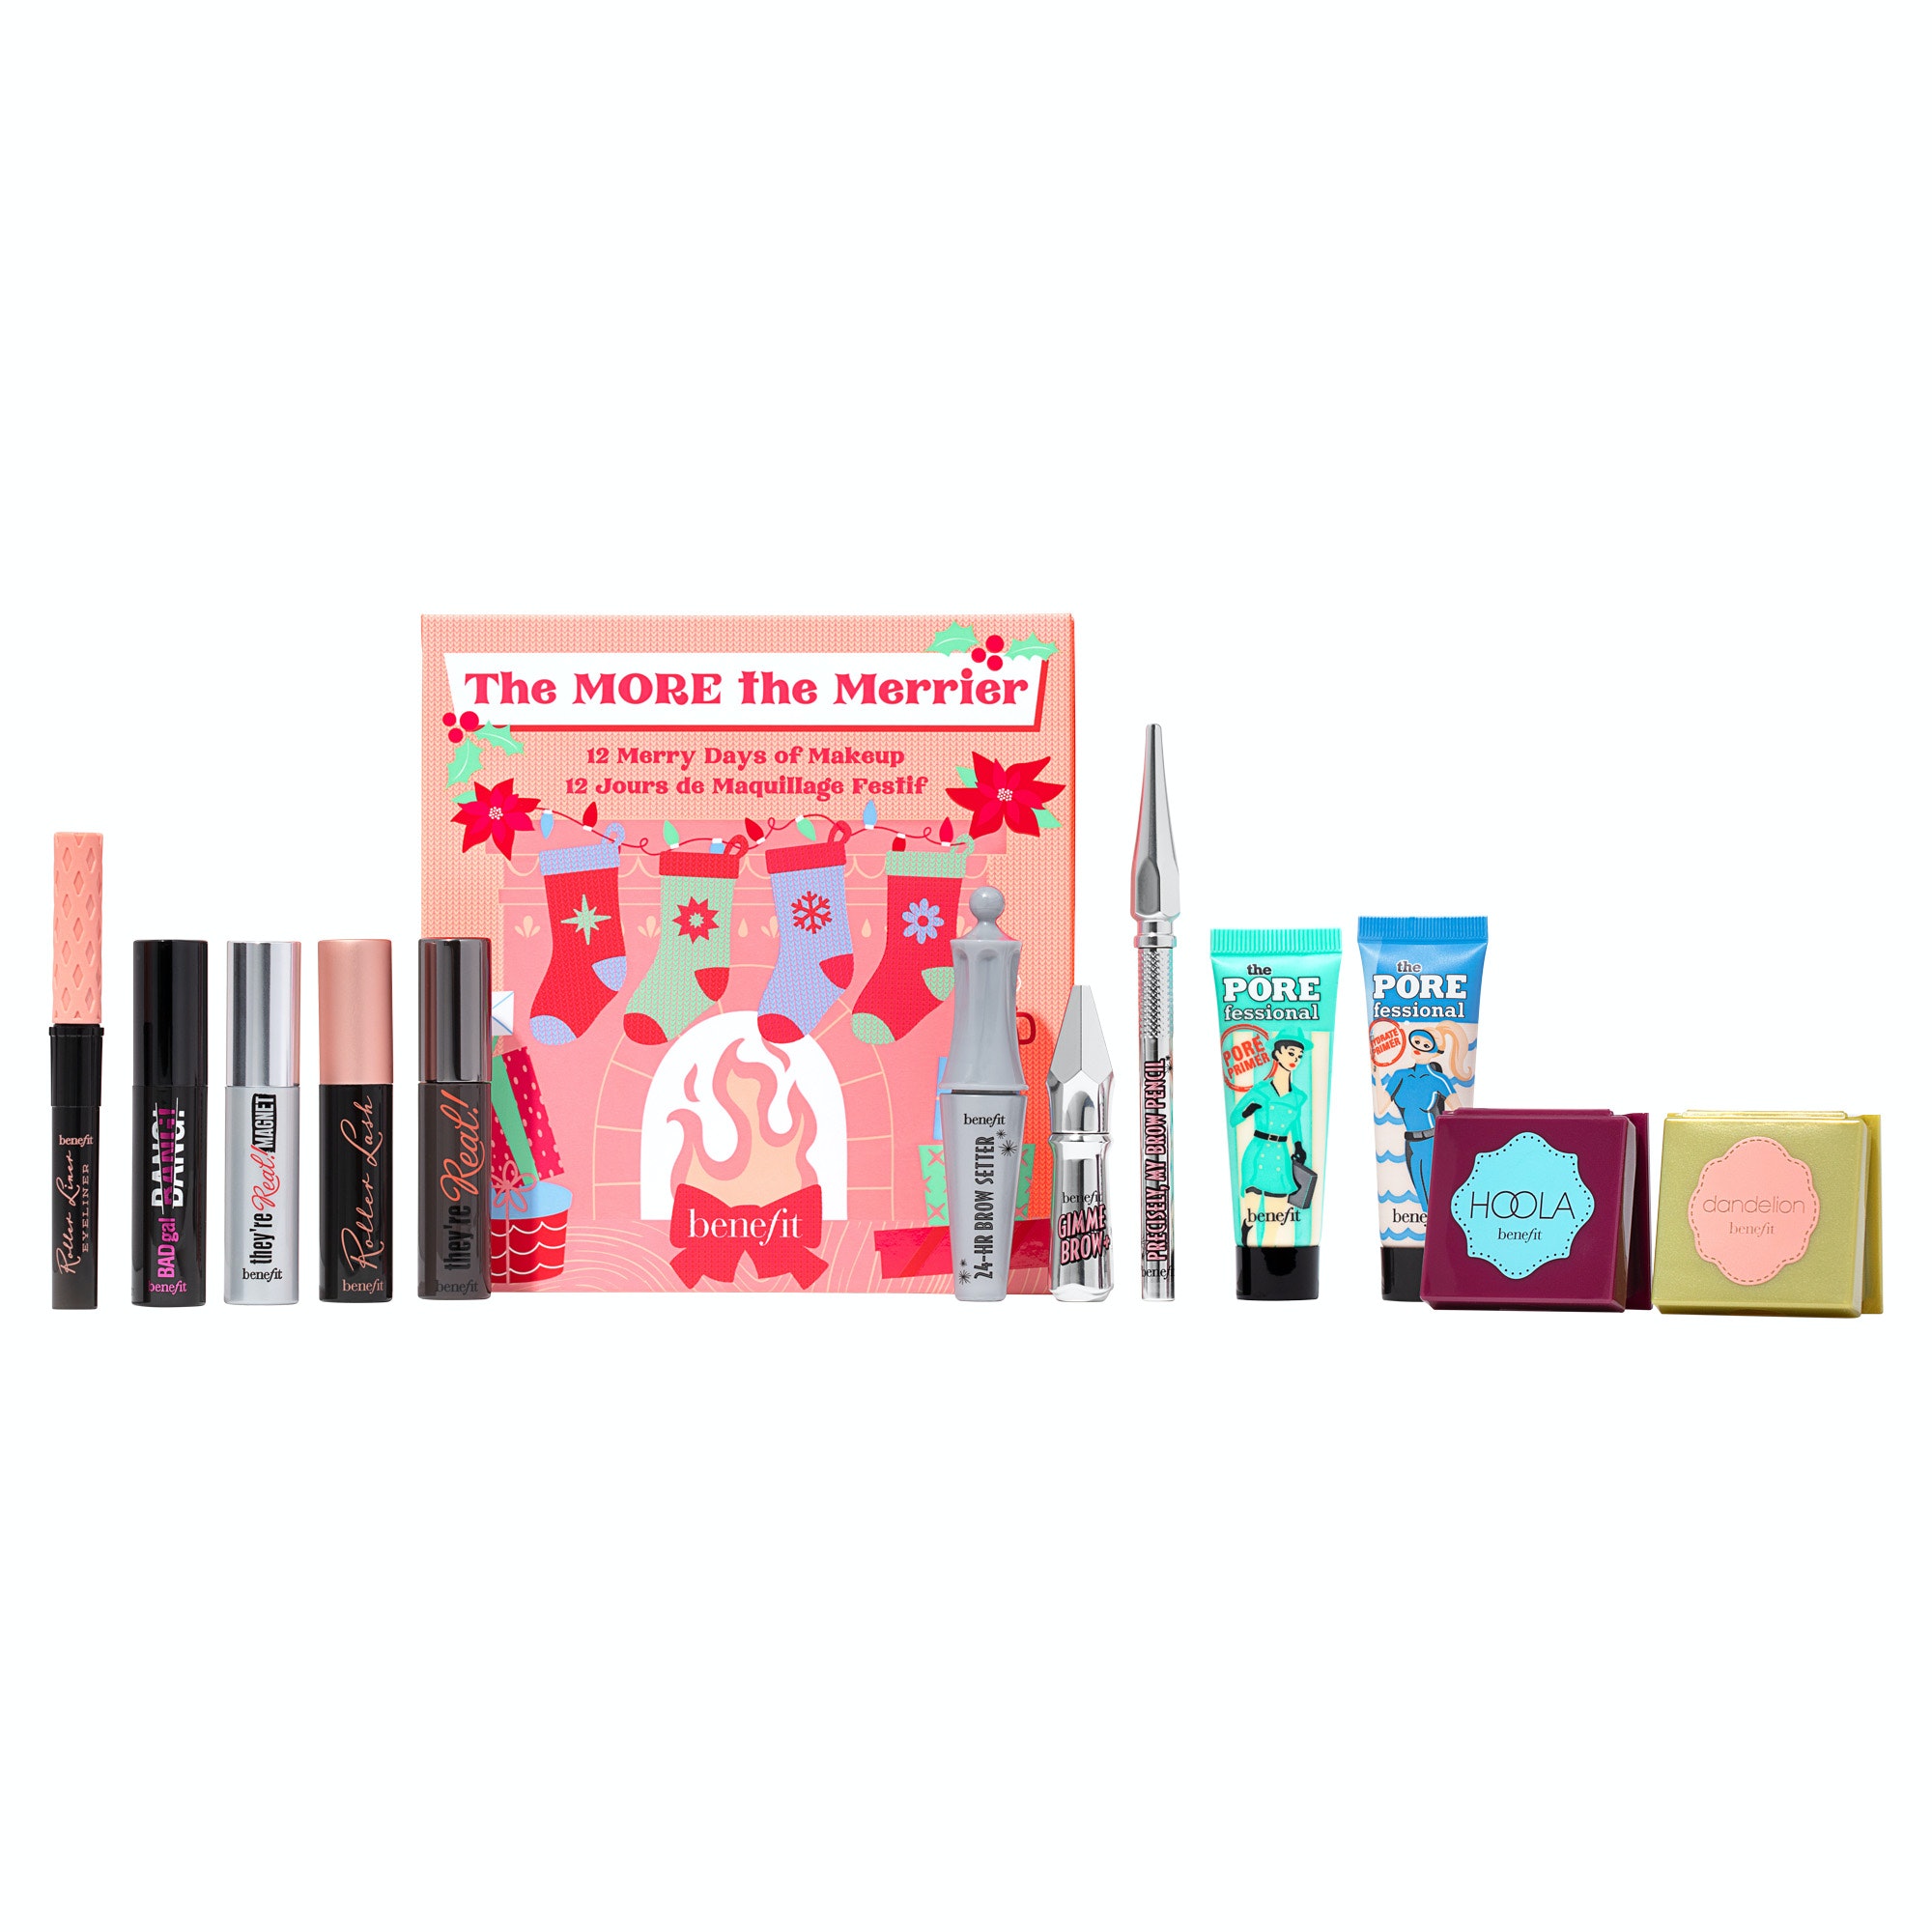 Benefit Cosmetics Shake Your Beauty Holiday 2020 Advent Calendar